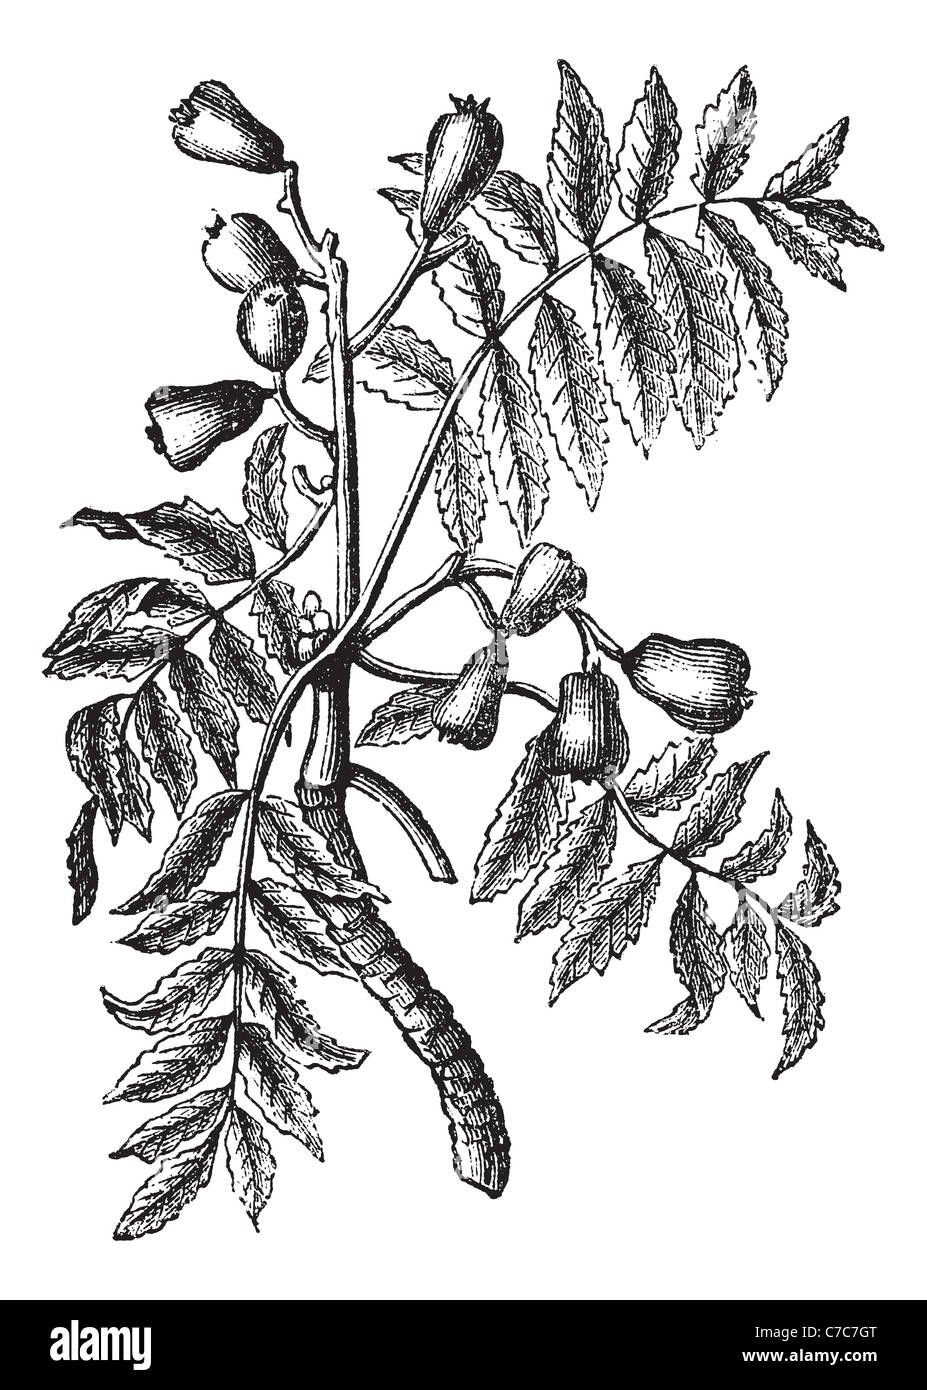 Sorbus domestica or Whitty Pear, vintage engraving. Old engraved illustration of Sorbus domestica isolated on a white background Stock Photo